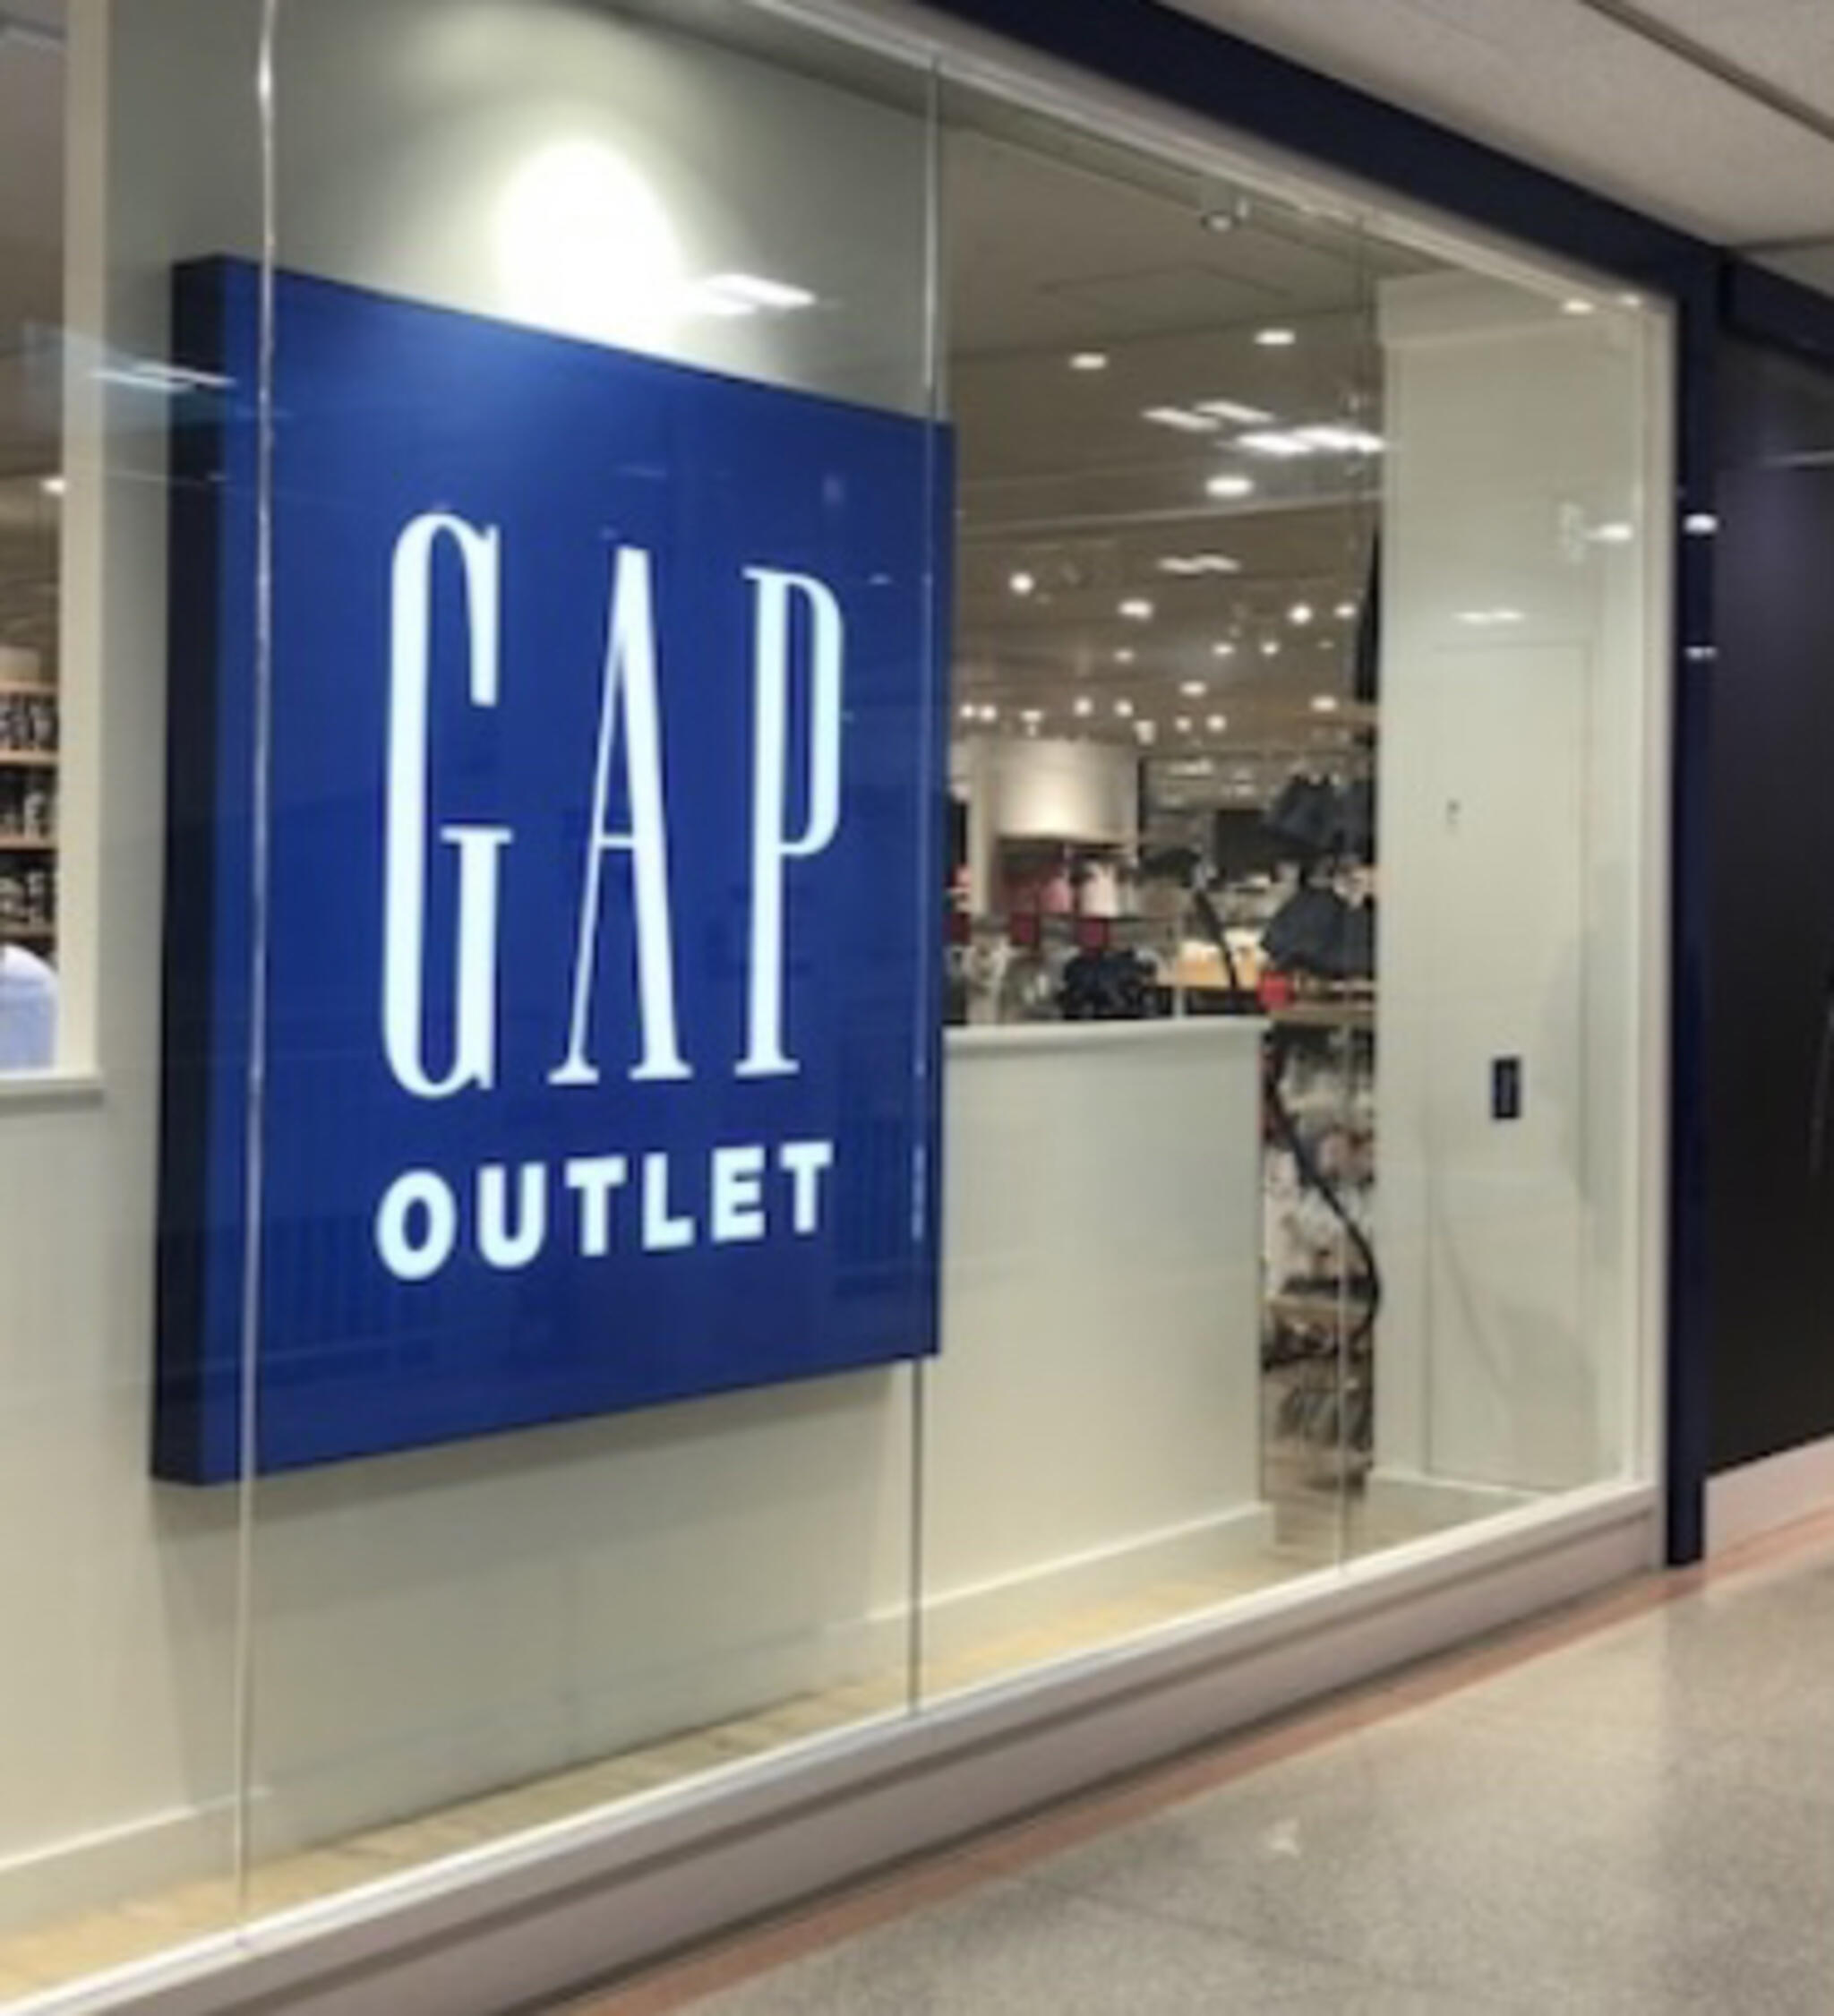 GAP Outlet 島忠ホームズ草加舎人店の代表写真9